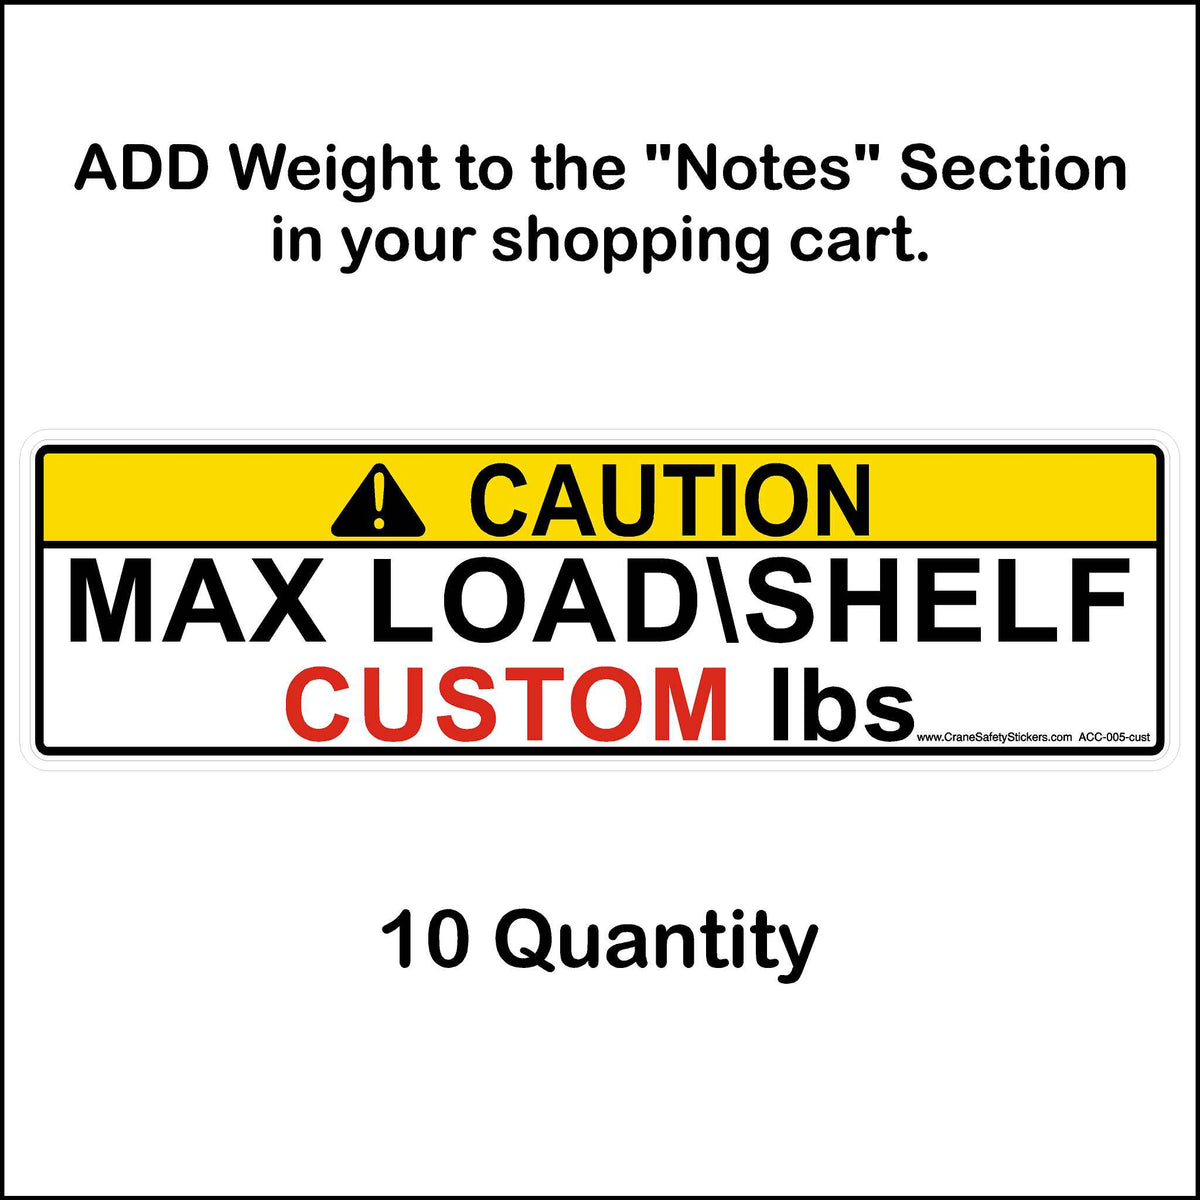 Custom, add your own weight to this maximum load shelf pallet rack label 10 quantity.